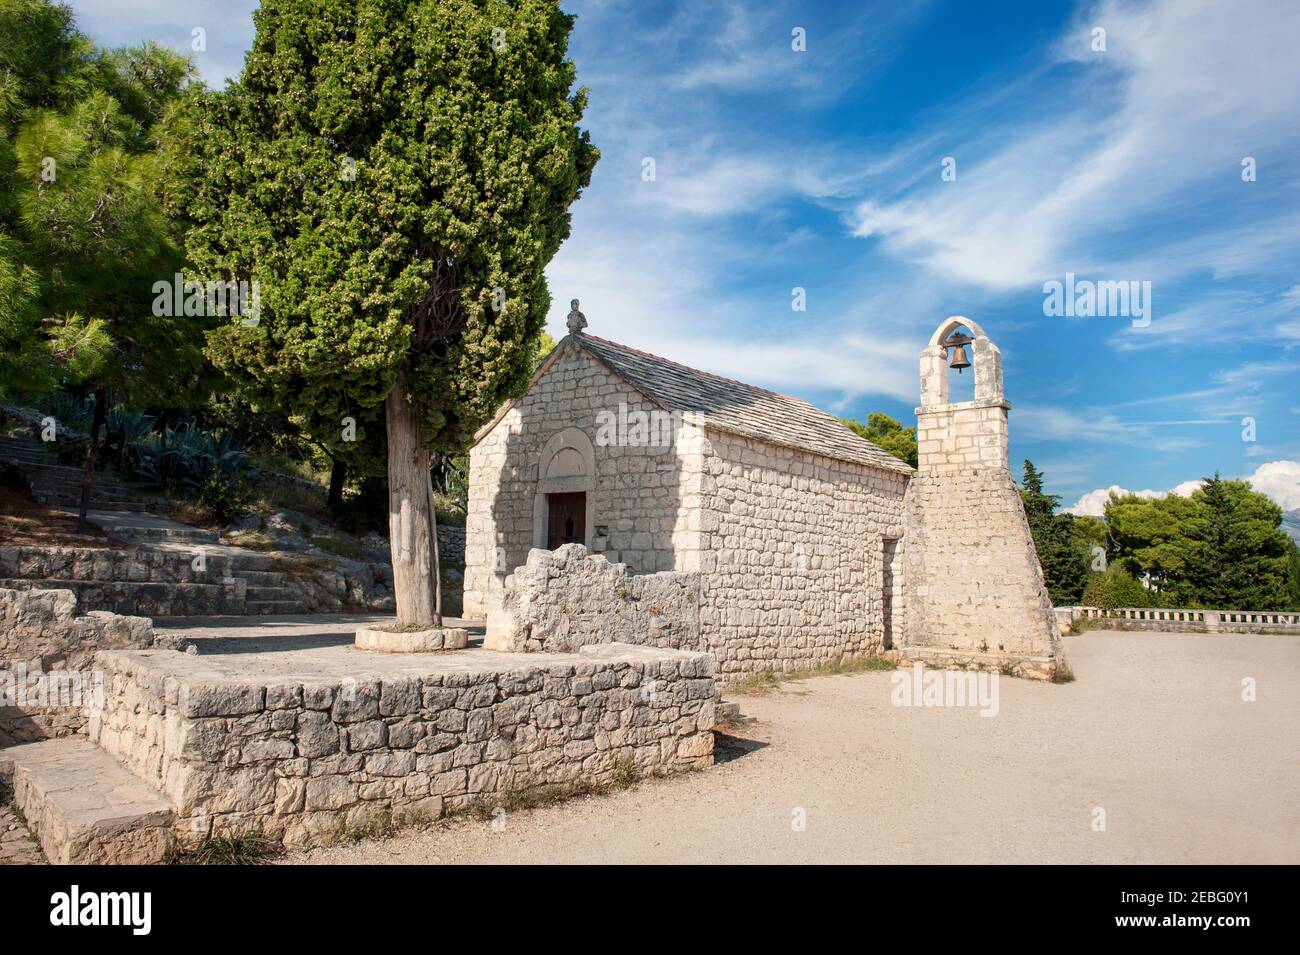 A small church of Saint Nicholas built in the early 13th century. This church was dedicated to the sailors who greeted them regularly while sailing pa Stock Photo